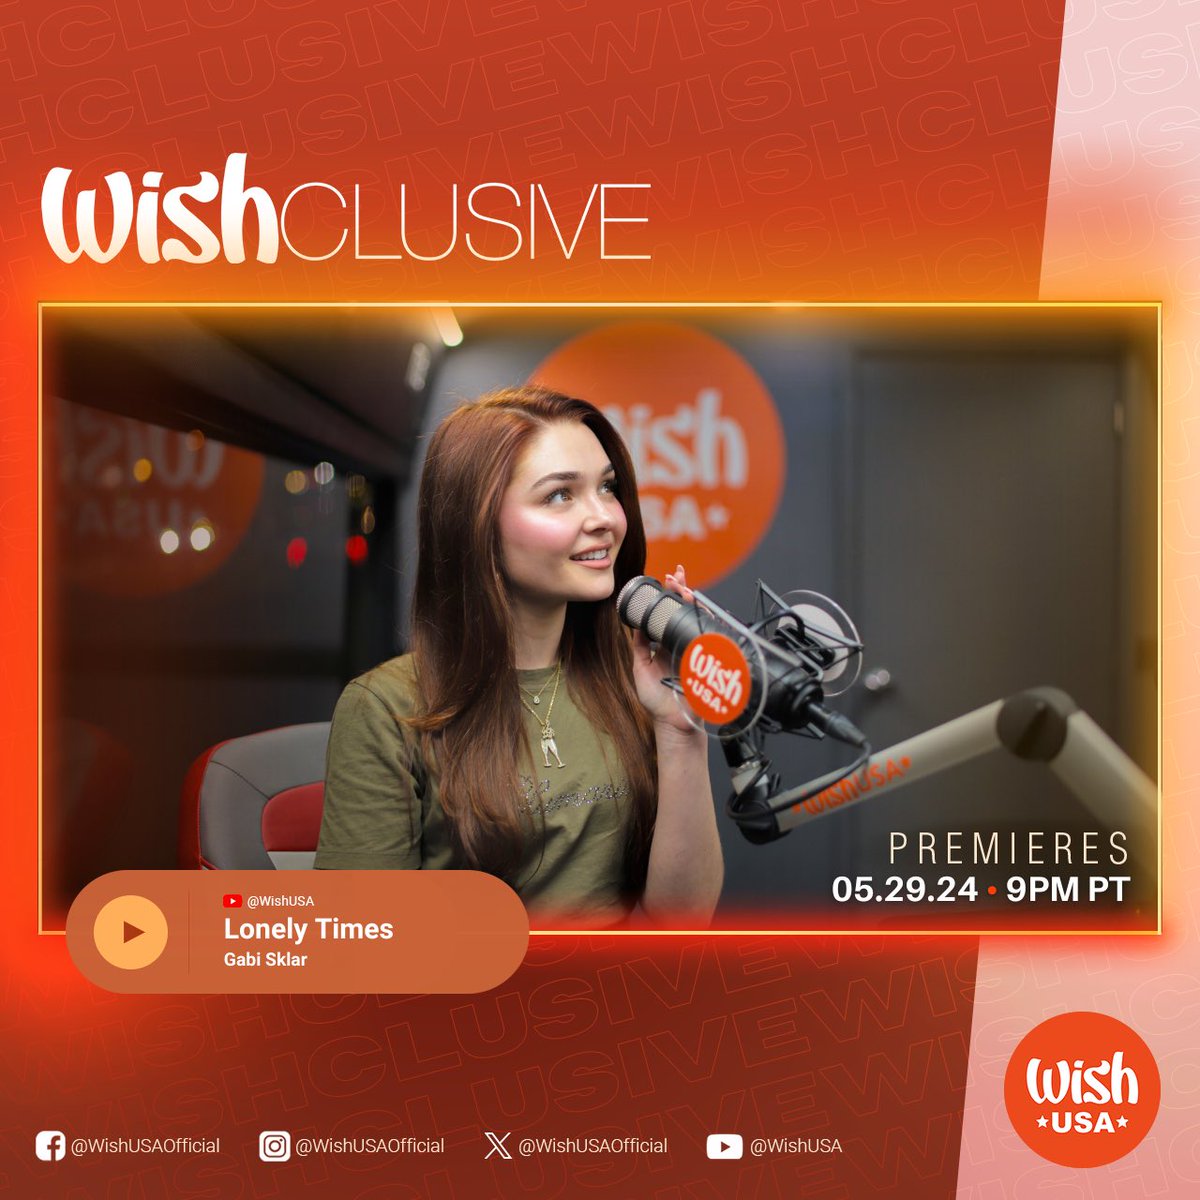 Feeling alone in a crowd? Don't miss Gabi Sklar's heartfelt performance of 'Lonely Times'! 💔✨ To watch the full Wishclusive premiere, visit our YouTube channel at YouTube.com/@WishUSA #WishBus #GabiSklar #LonelyTimes #Wishclusive #LiveMusic #NewMusic #MusicPremiere #Tunes